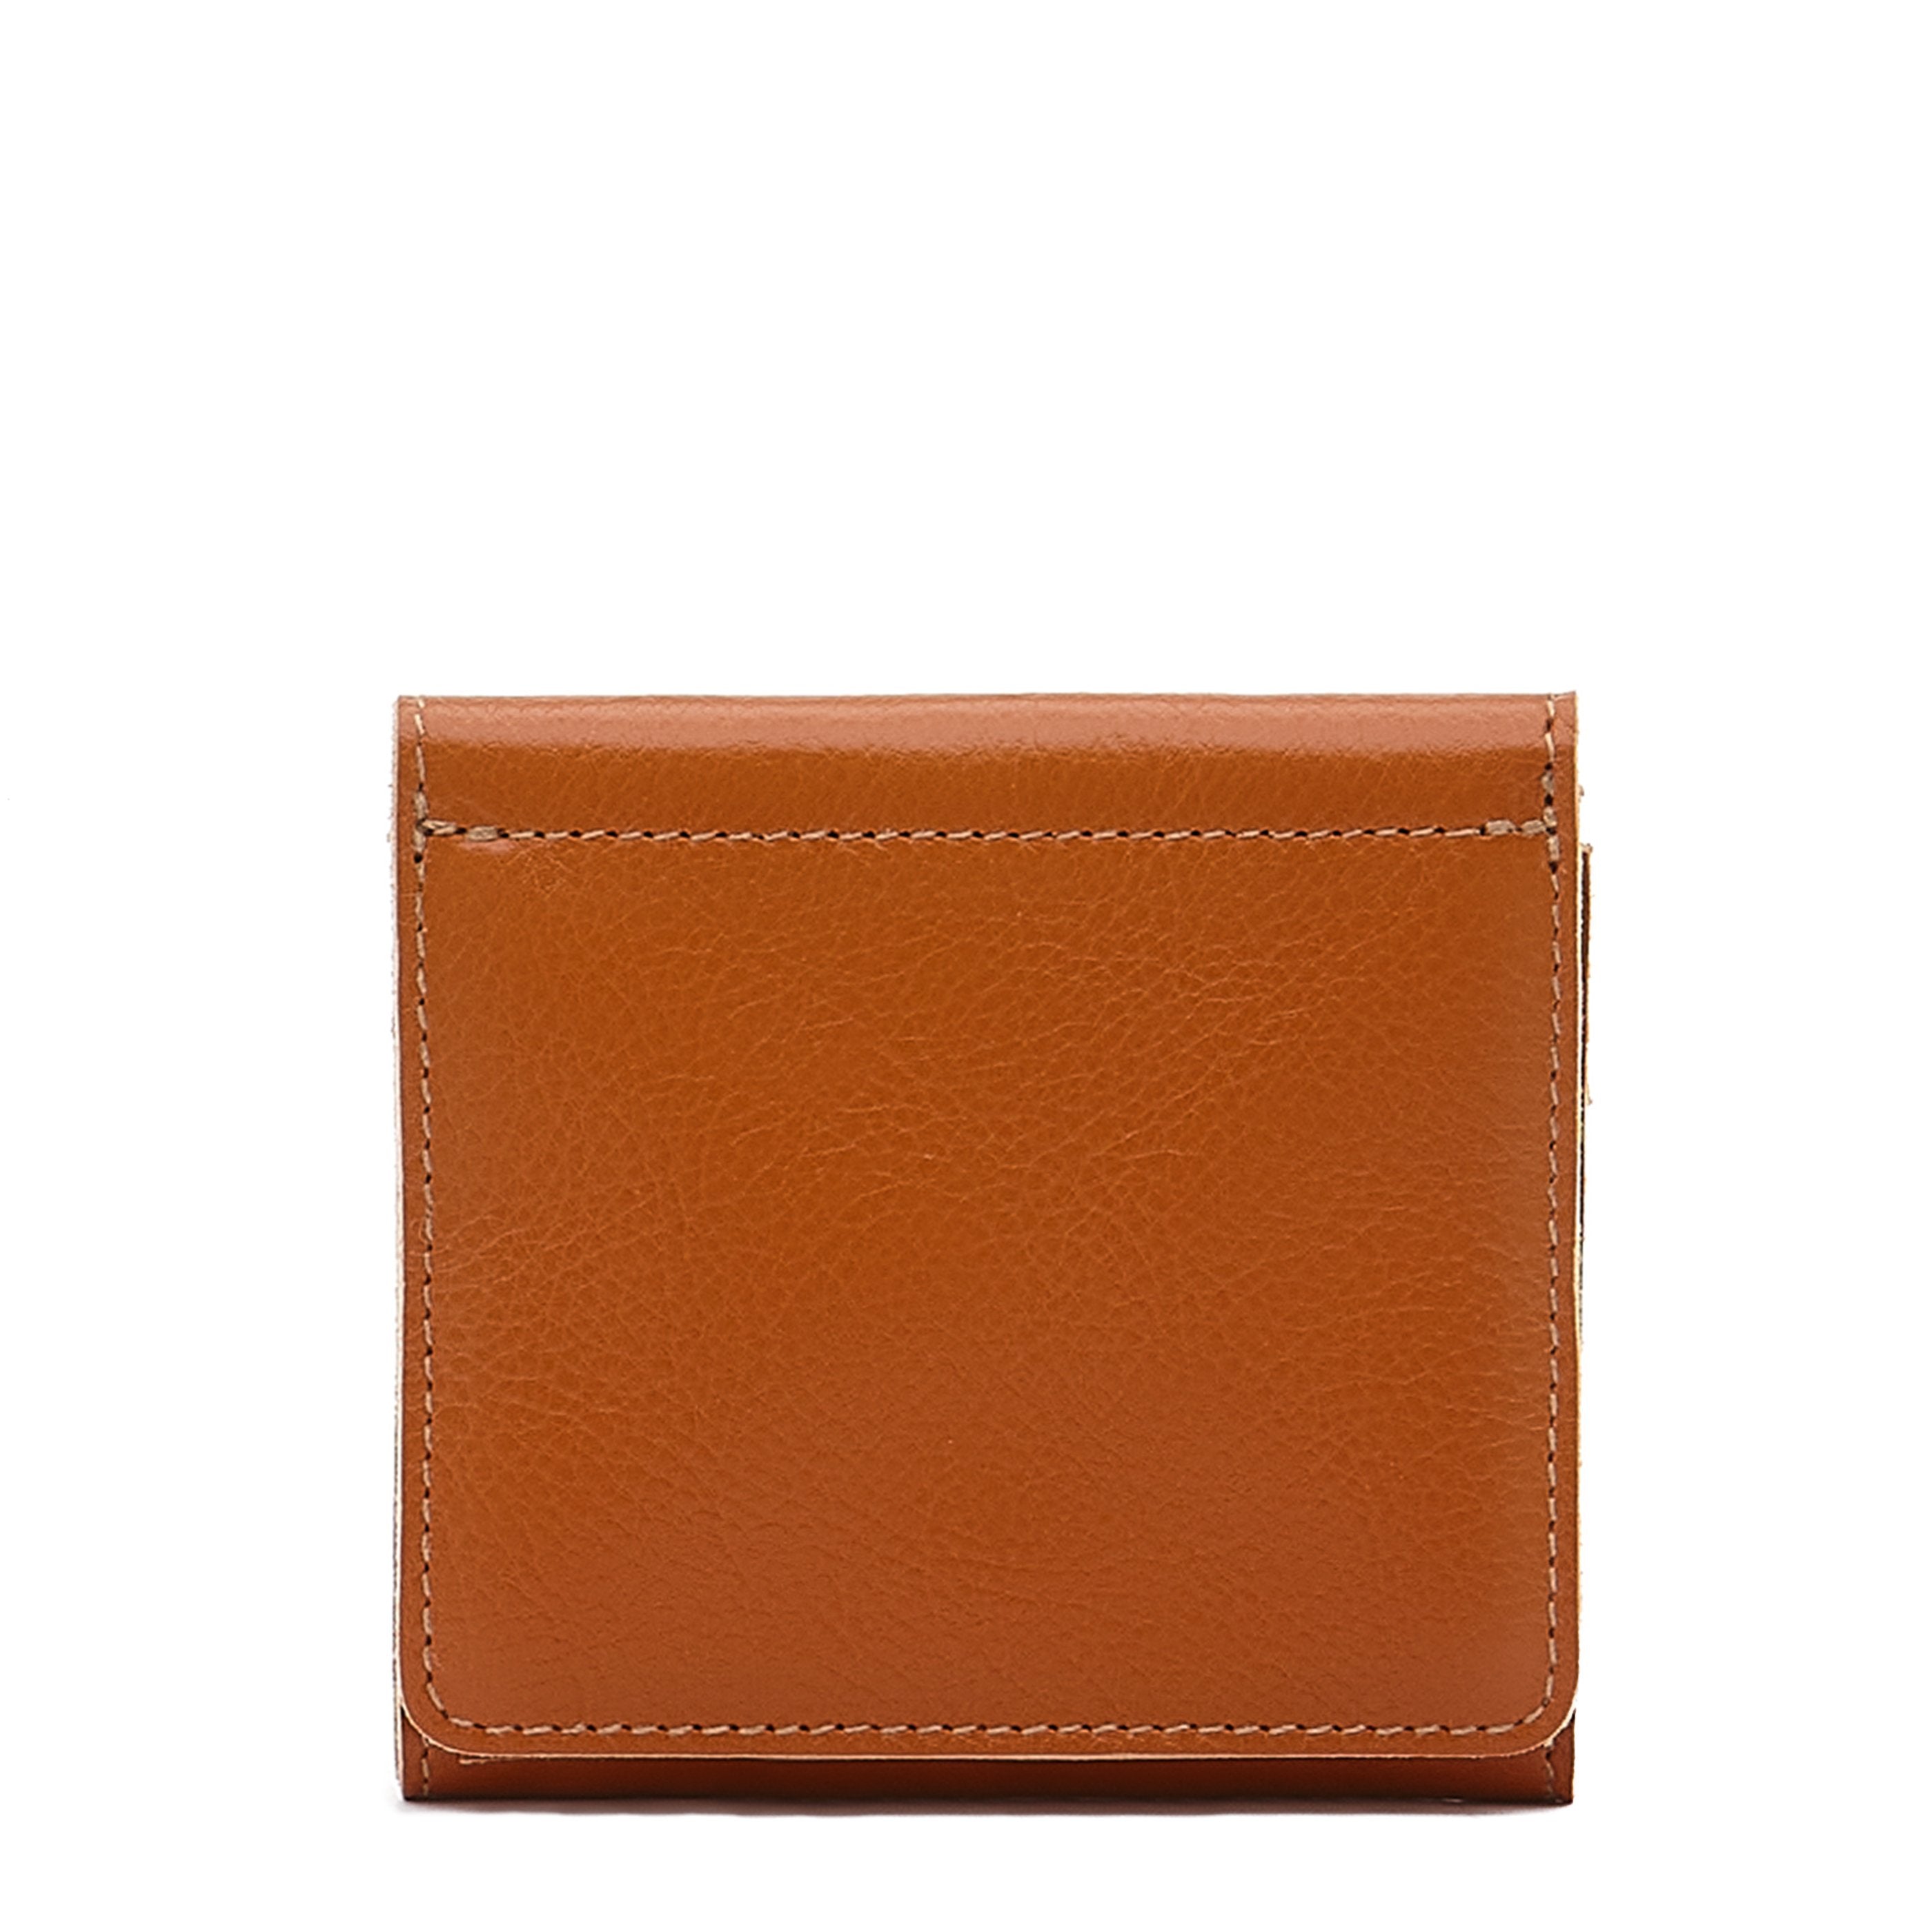 Wallet in calf leather color caramel